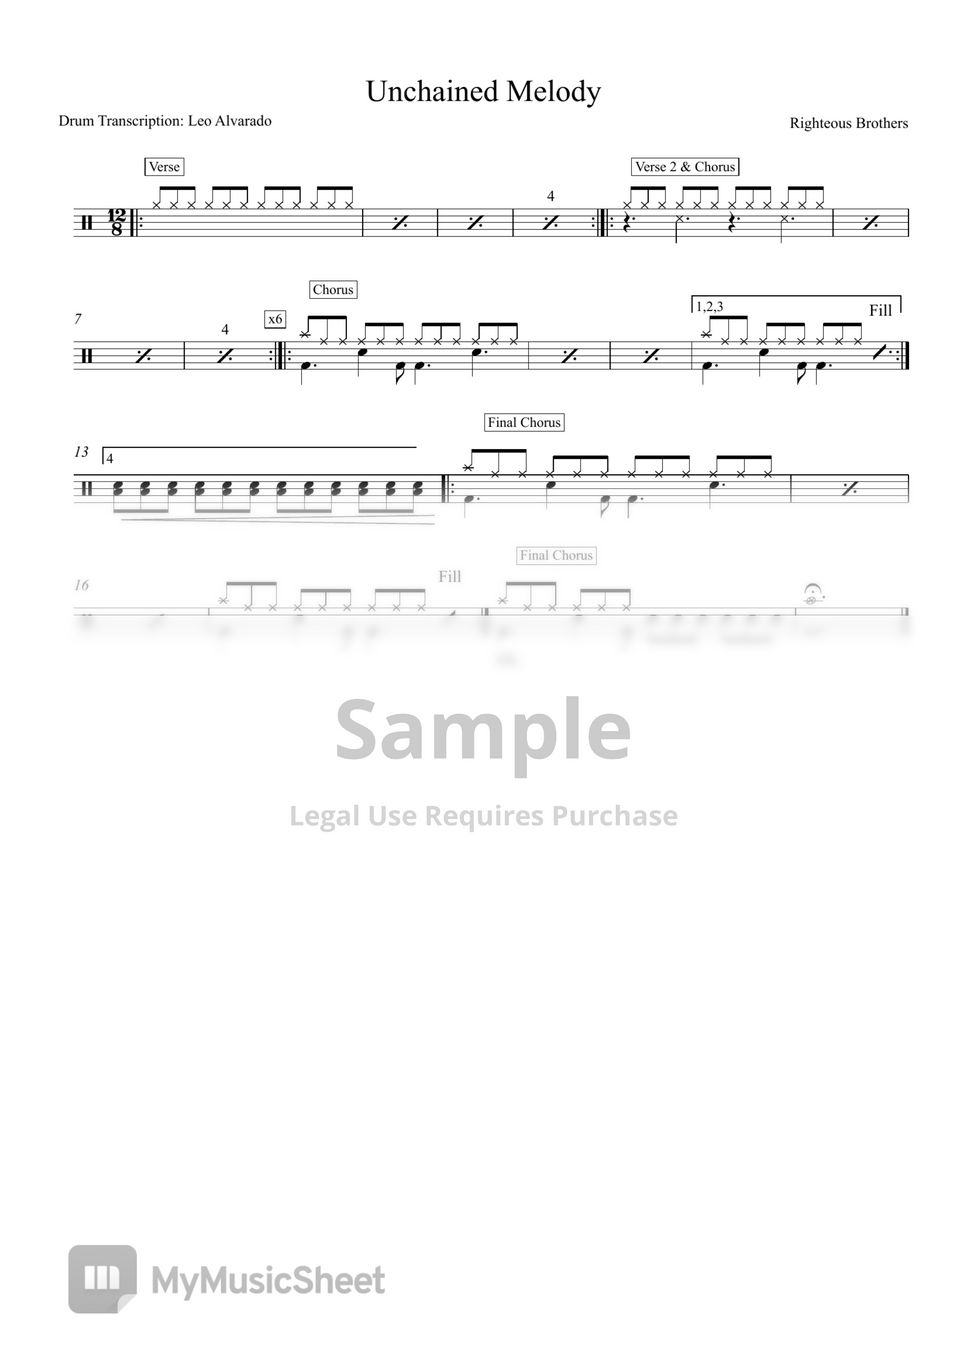 Righteous Brothers - Unchained Melody by Drum Transcription: Leo Alvarado